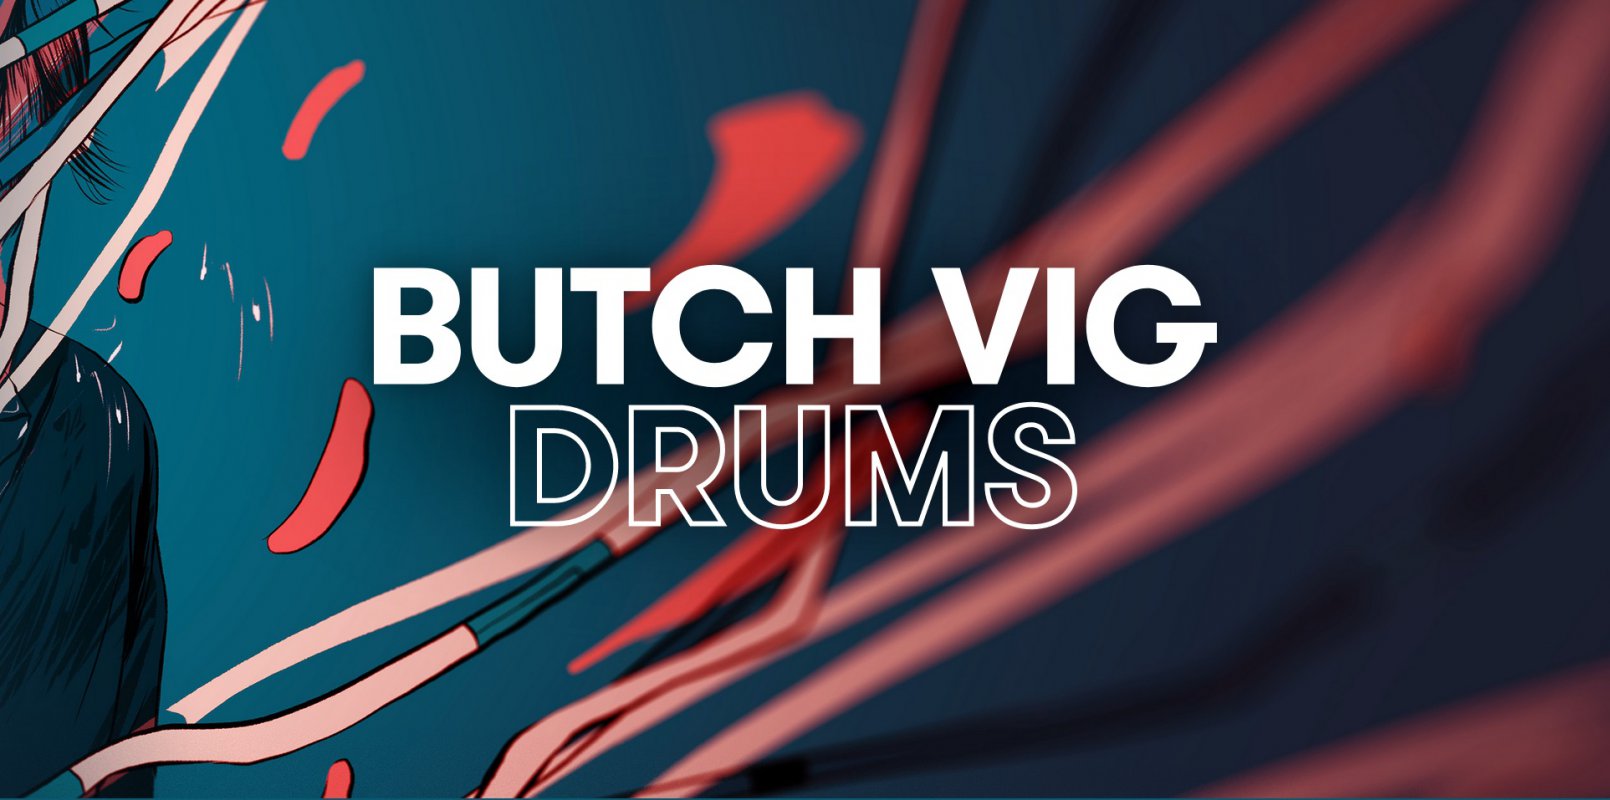 Mer information om "NATIVE INSTRUMENTS ANNOUNCES NEW PLAY SERIES COLLAB WITH BUTCH VIG"